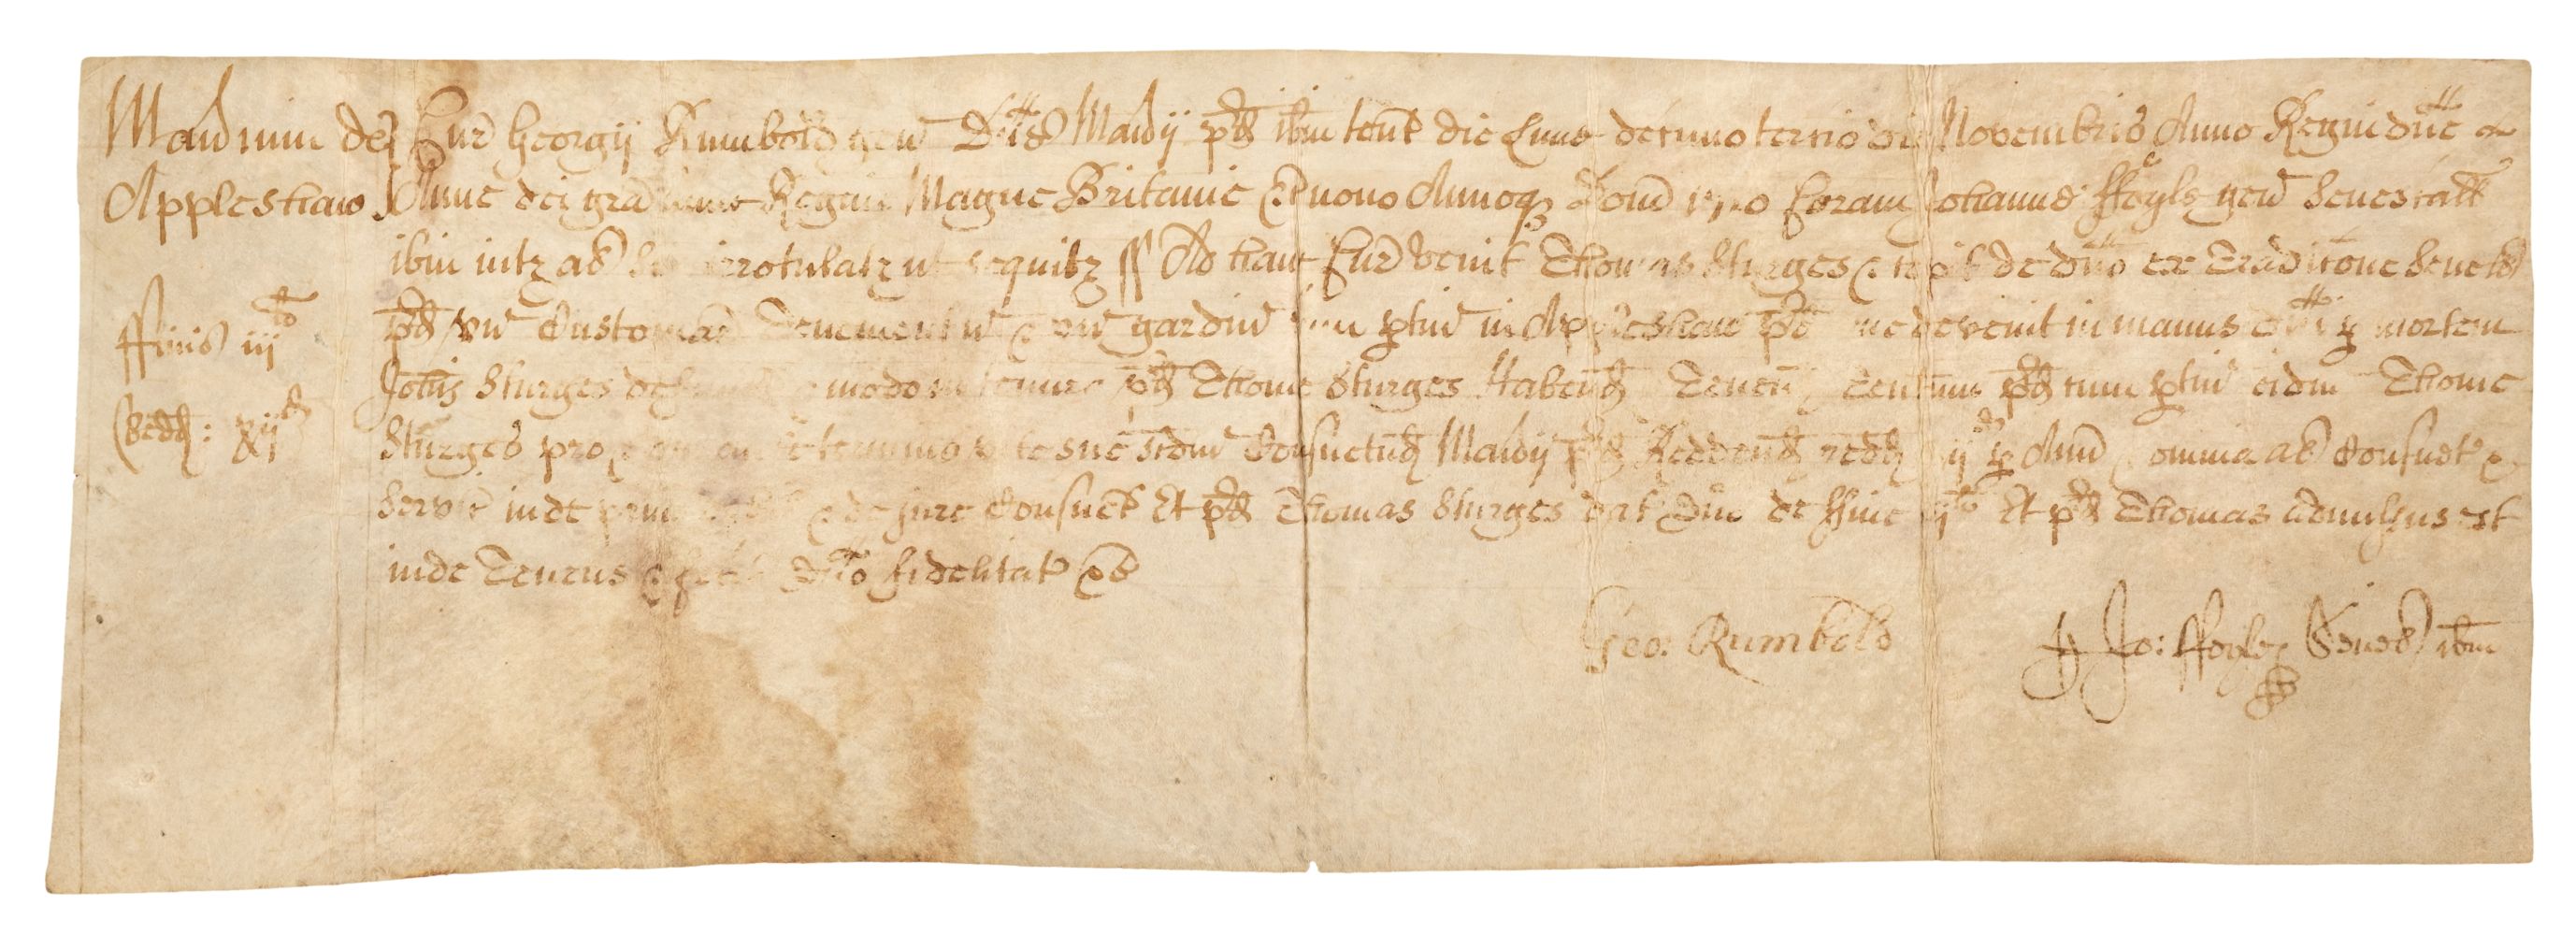 Foyle Family Deeds. A group of 3 vellum deeds relating to the Foyle family, 1619, 1677 & 1710